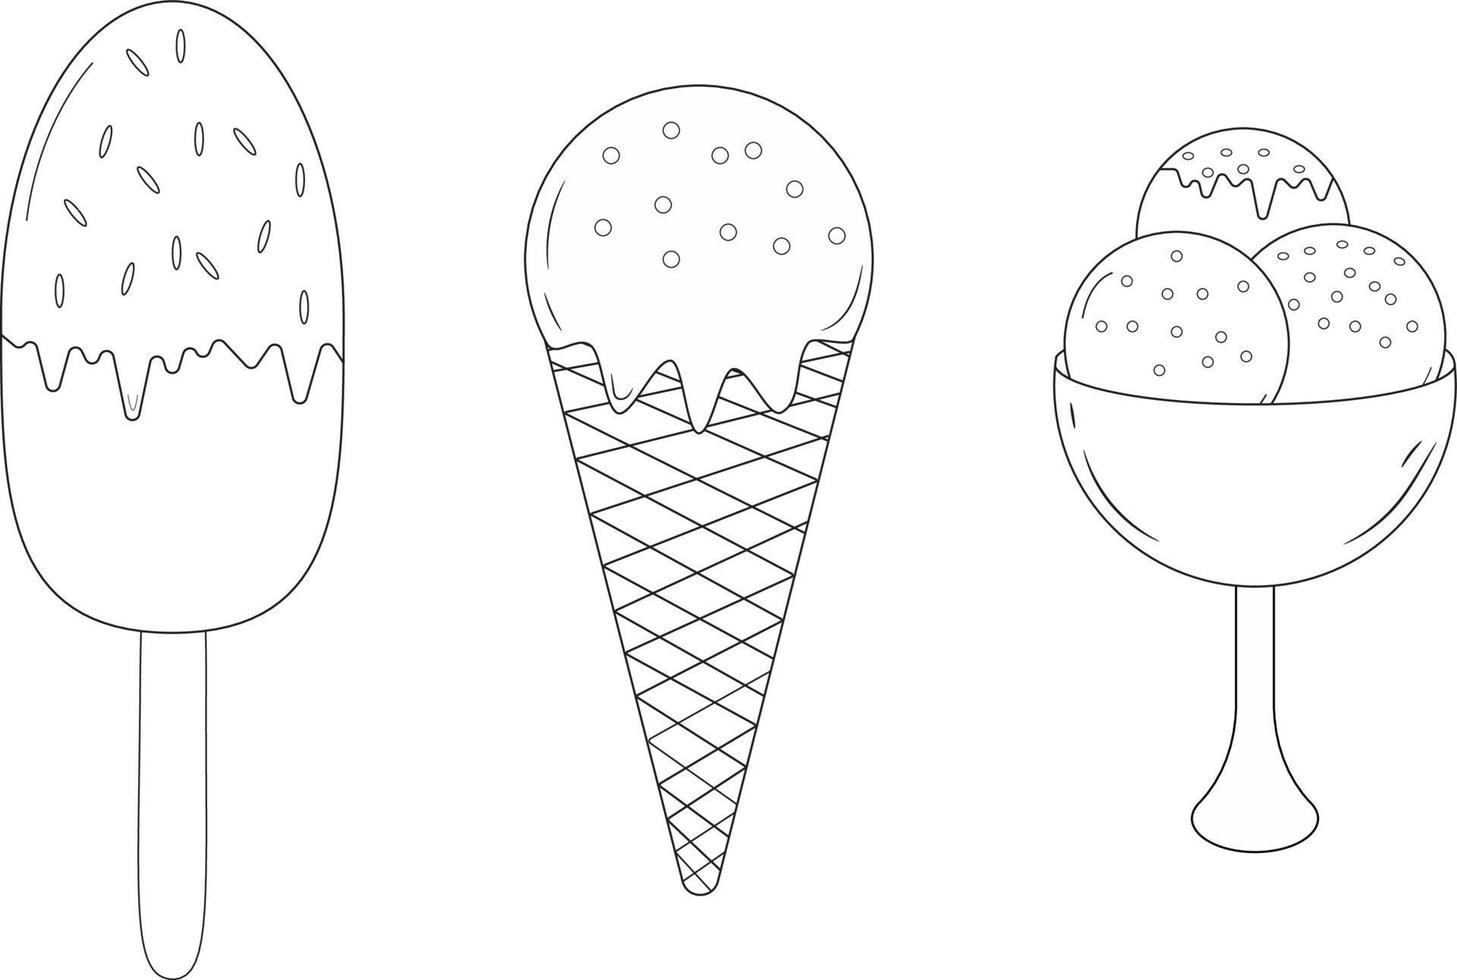 Hand drawn set of ice cream doodle. sweet desserts. Eskimo, waffle con e sketch style vector illustration isolated on white background for cafe or restaurant menu.